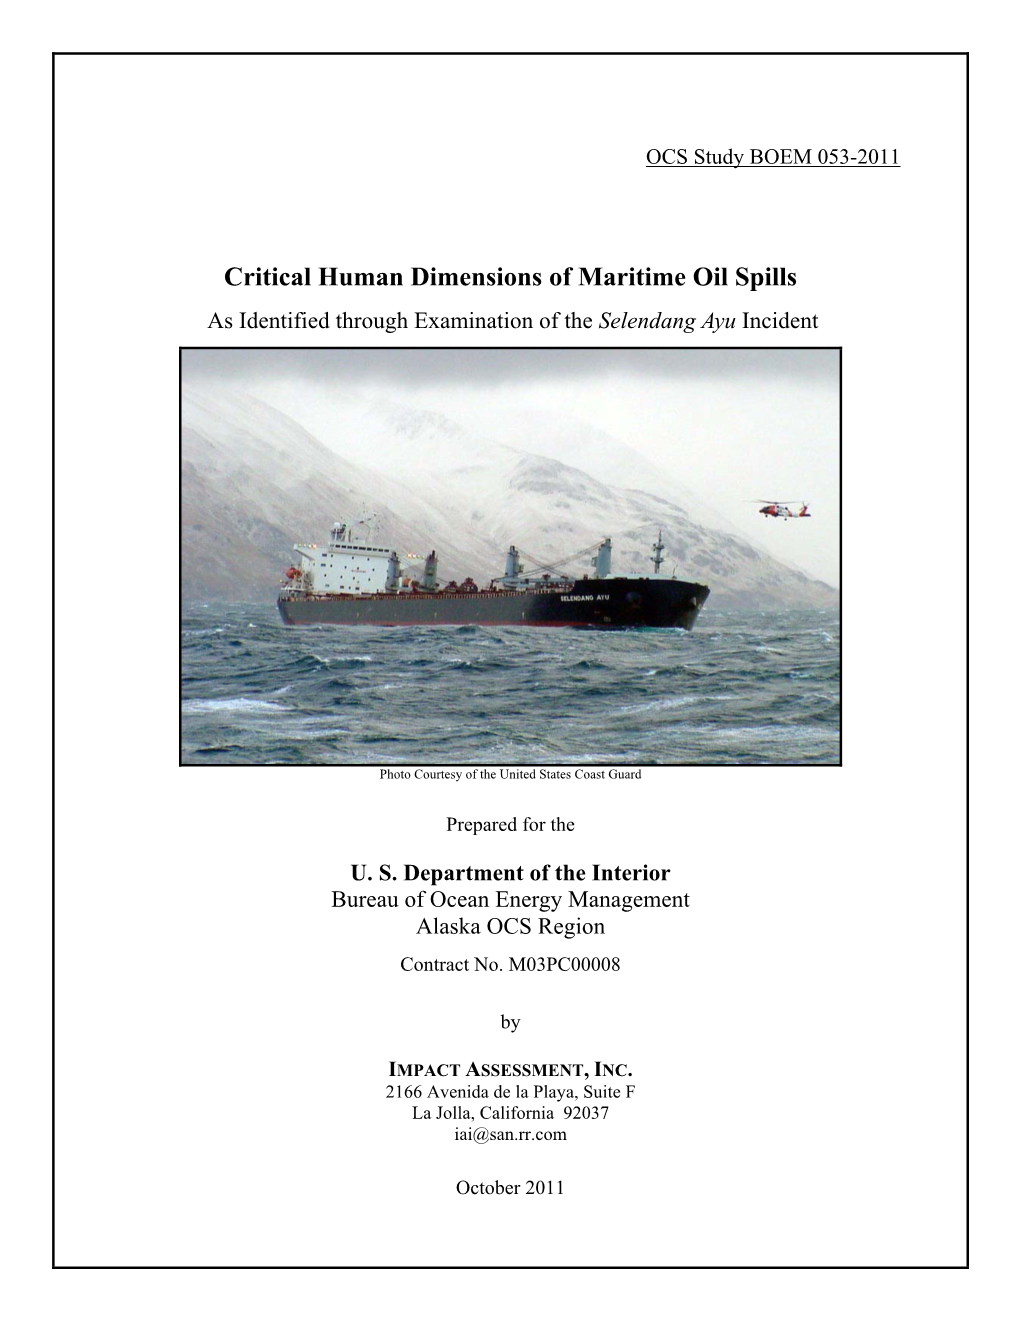 Critical Human Dimensions of Maritime Oil Spills As Identified Through Examination of the Selendang Ayu Incident